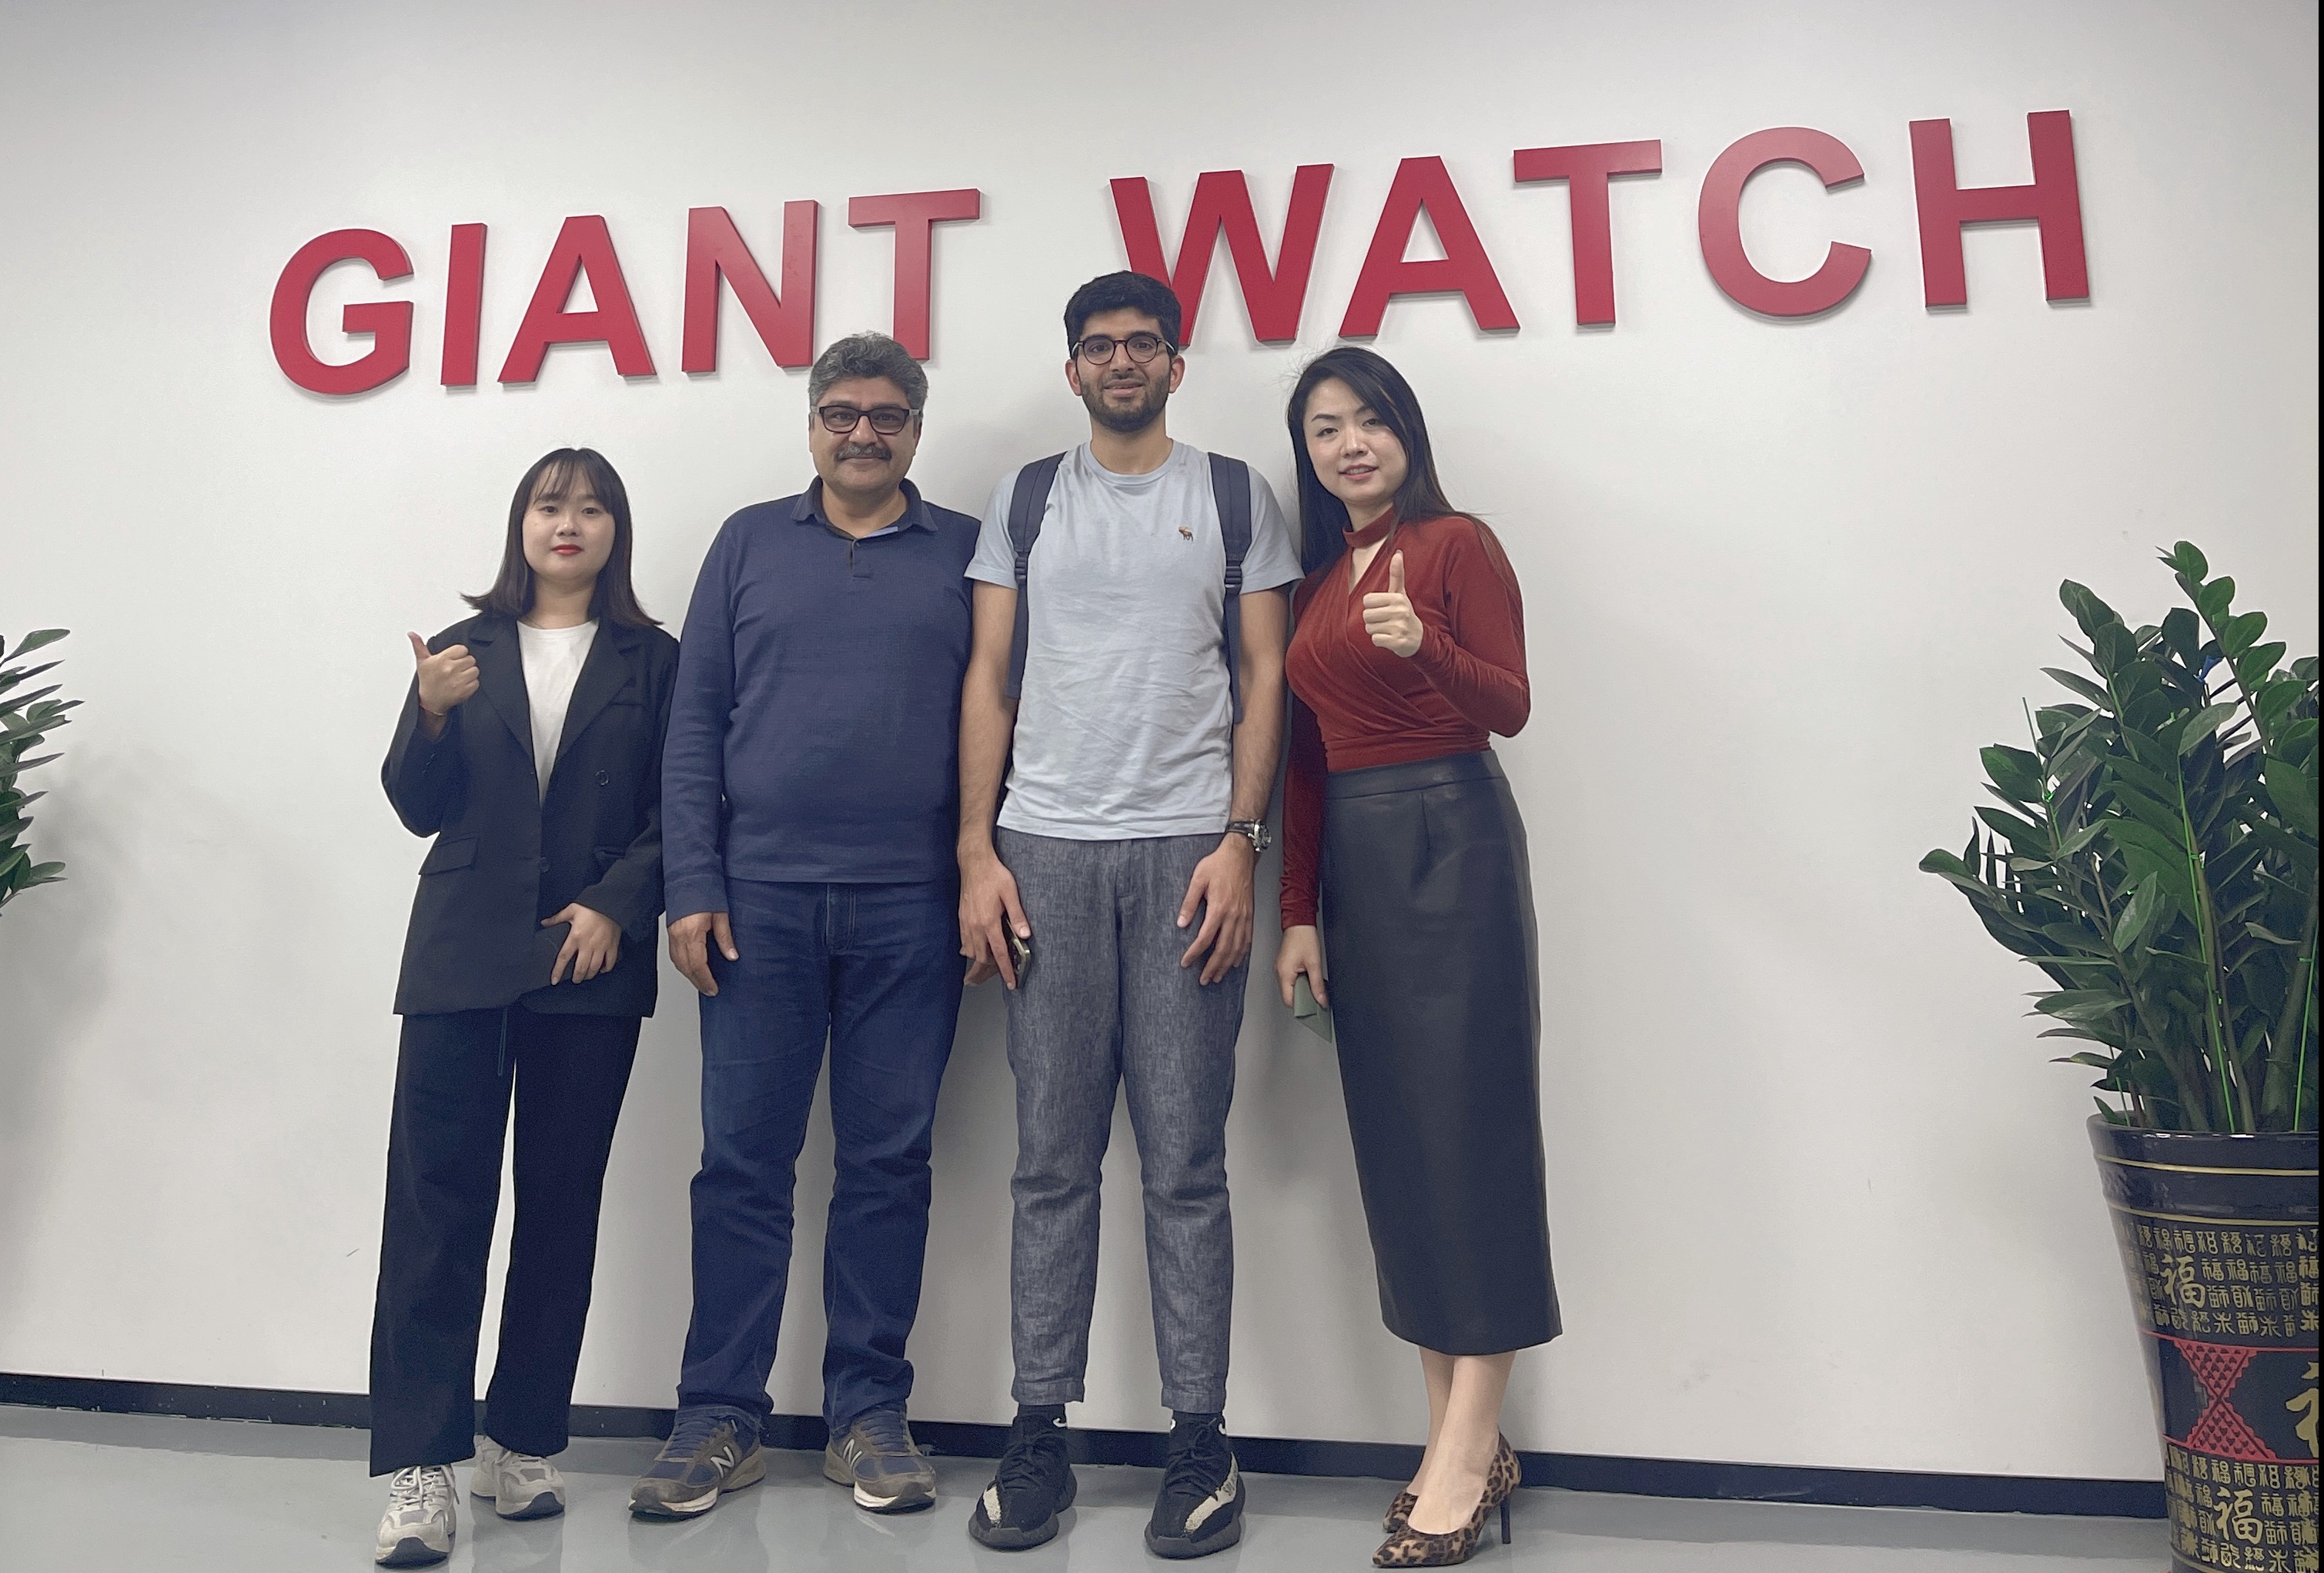 Moving Forward Together – New Client Visits Our Watch Factory